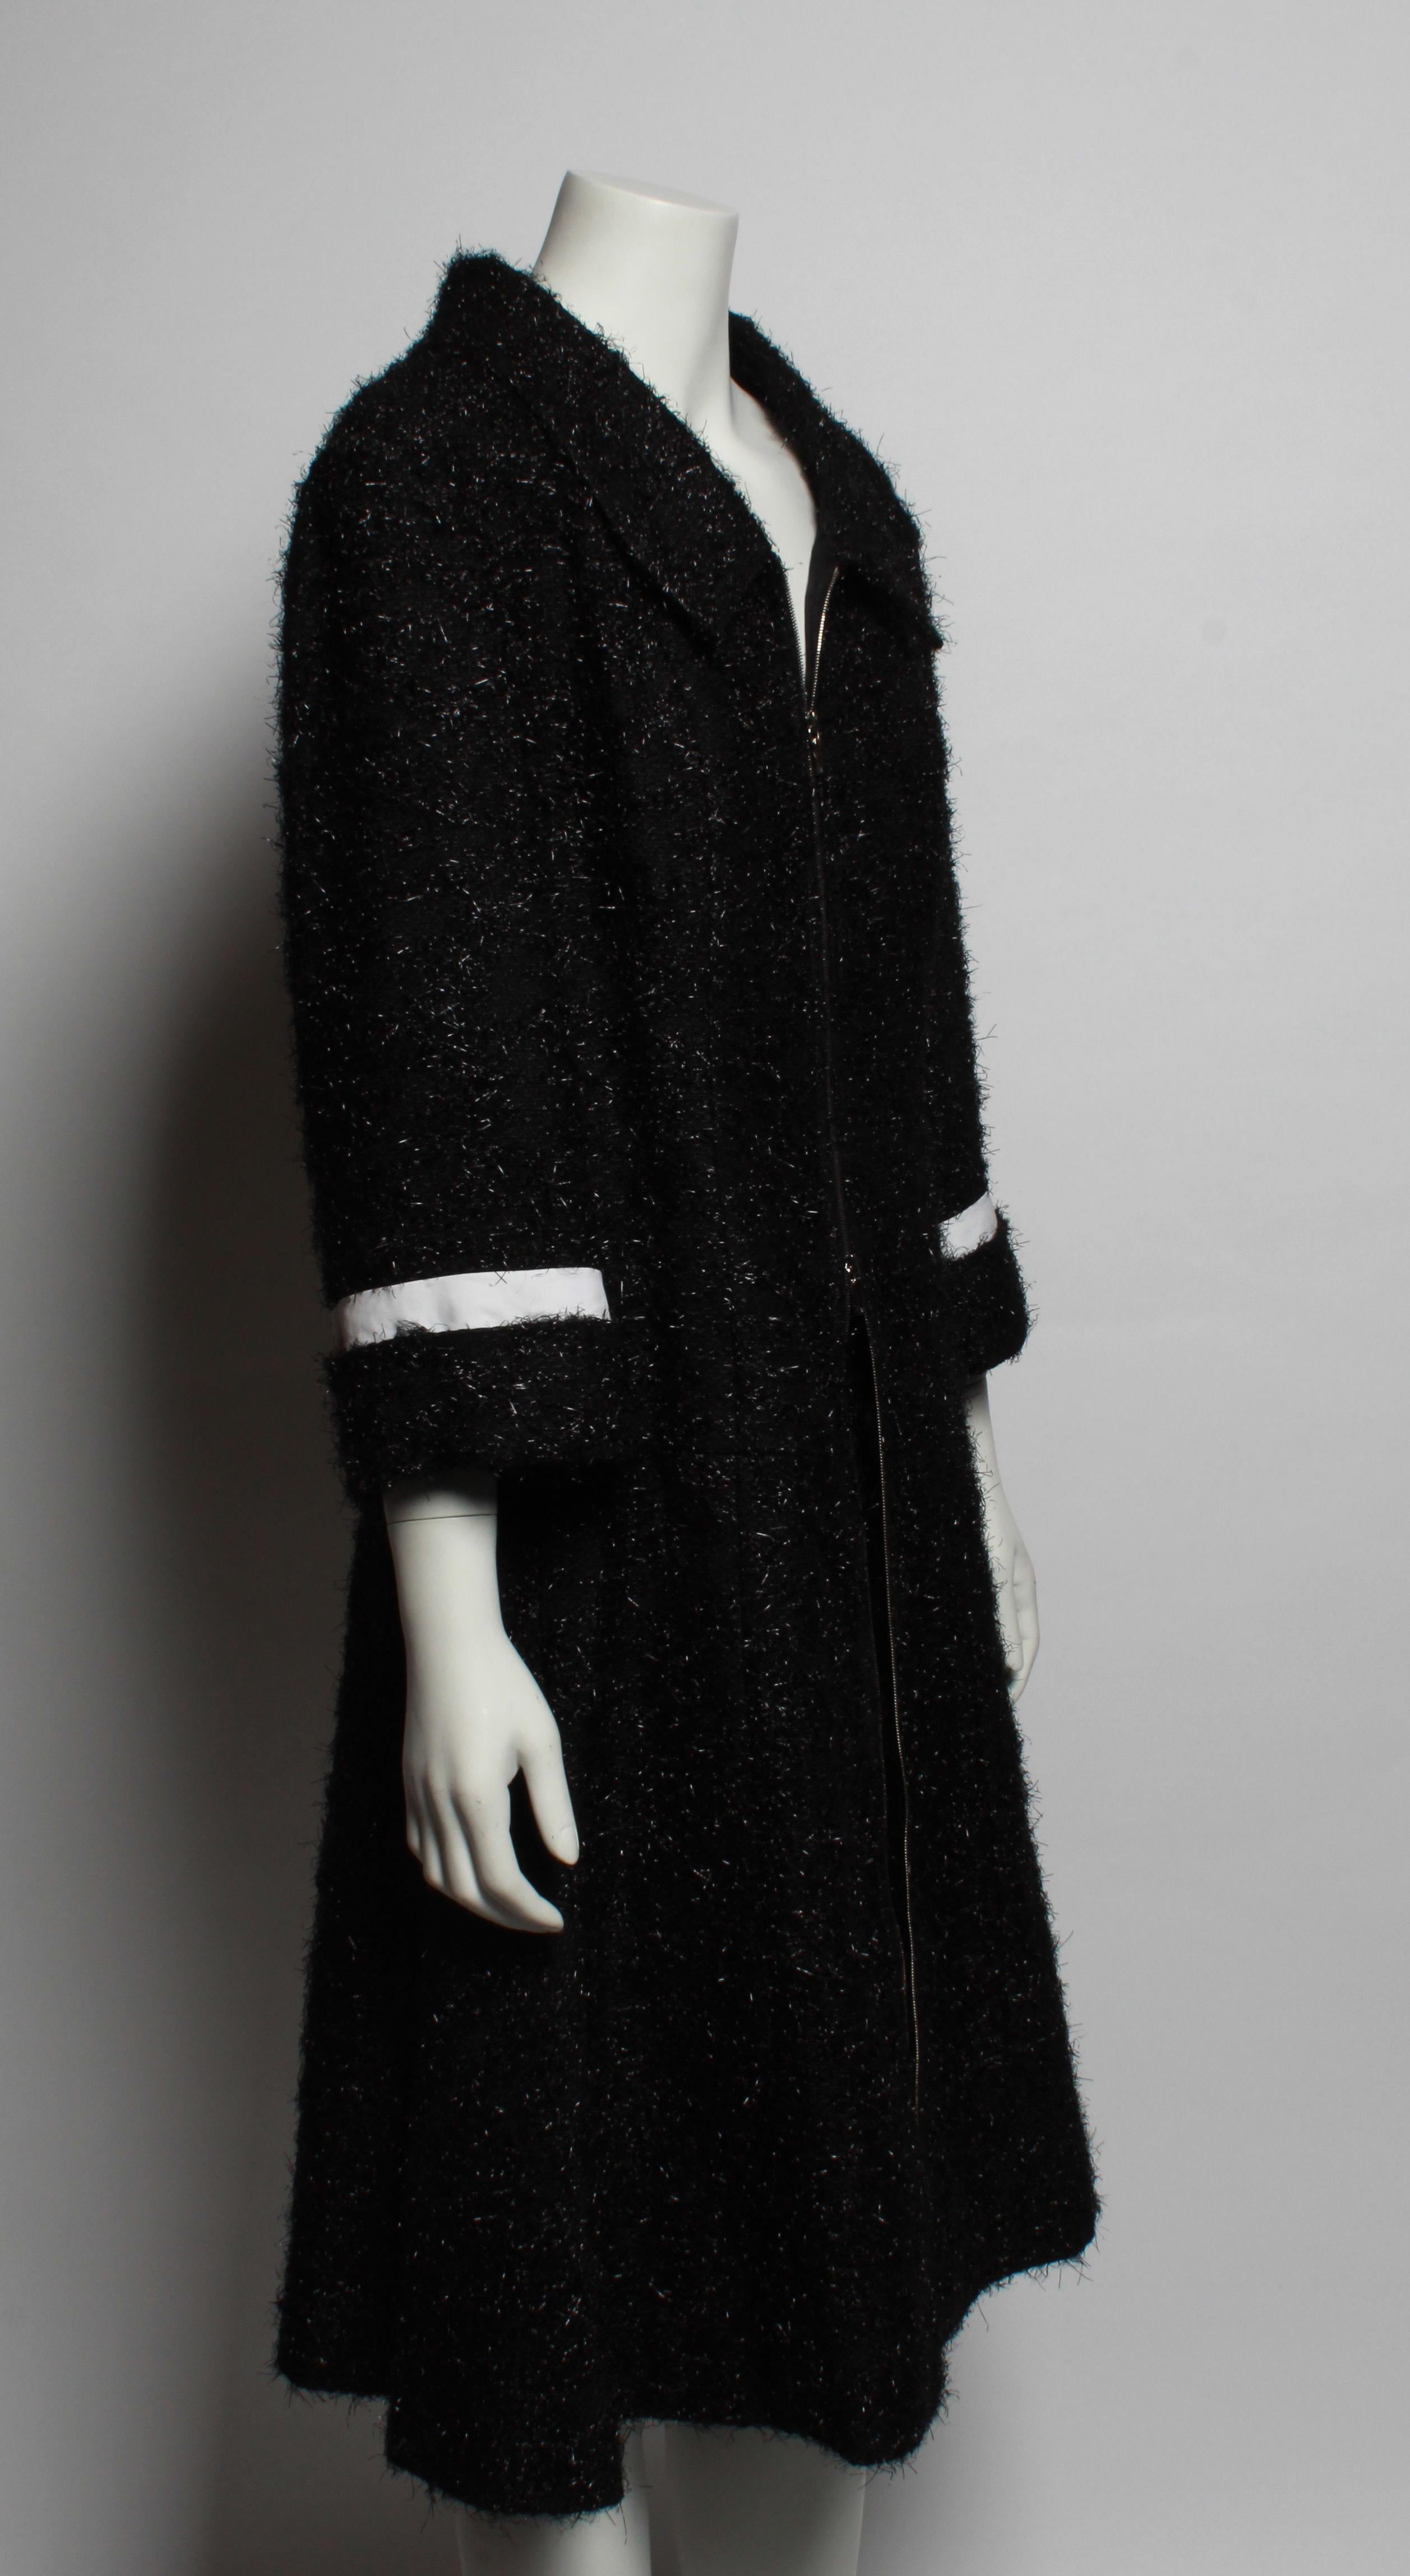 Stunning runway Chanel two piece coat and skirt suit ensemble from the 2013 Collection. 
Coat is made from luxurious black lurex boucle'  and features an A line silhouette, 2 way front zipper closure and detachable white cotton collar. The sleeve is